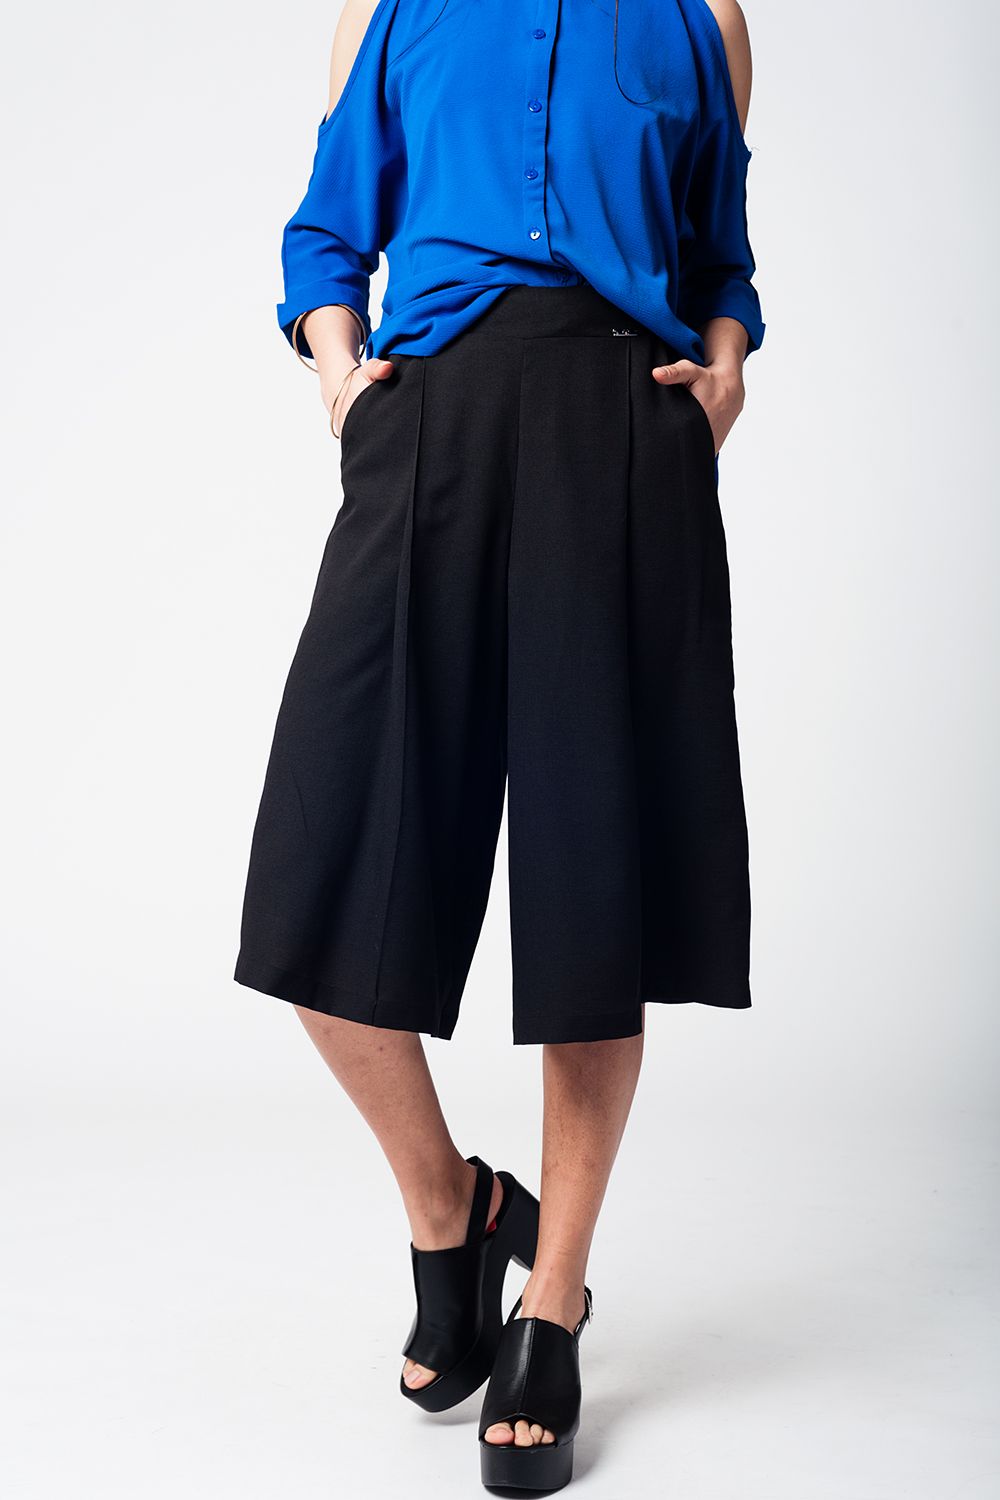 Black Pants Skirt With Silver Buttons - Mack & Harvie